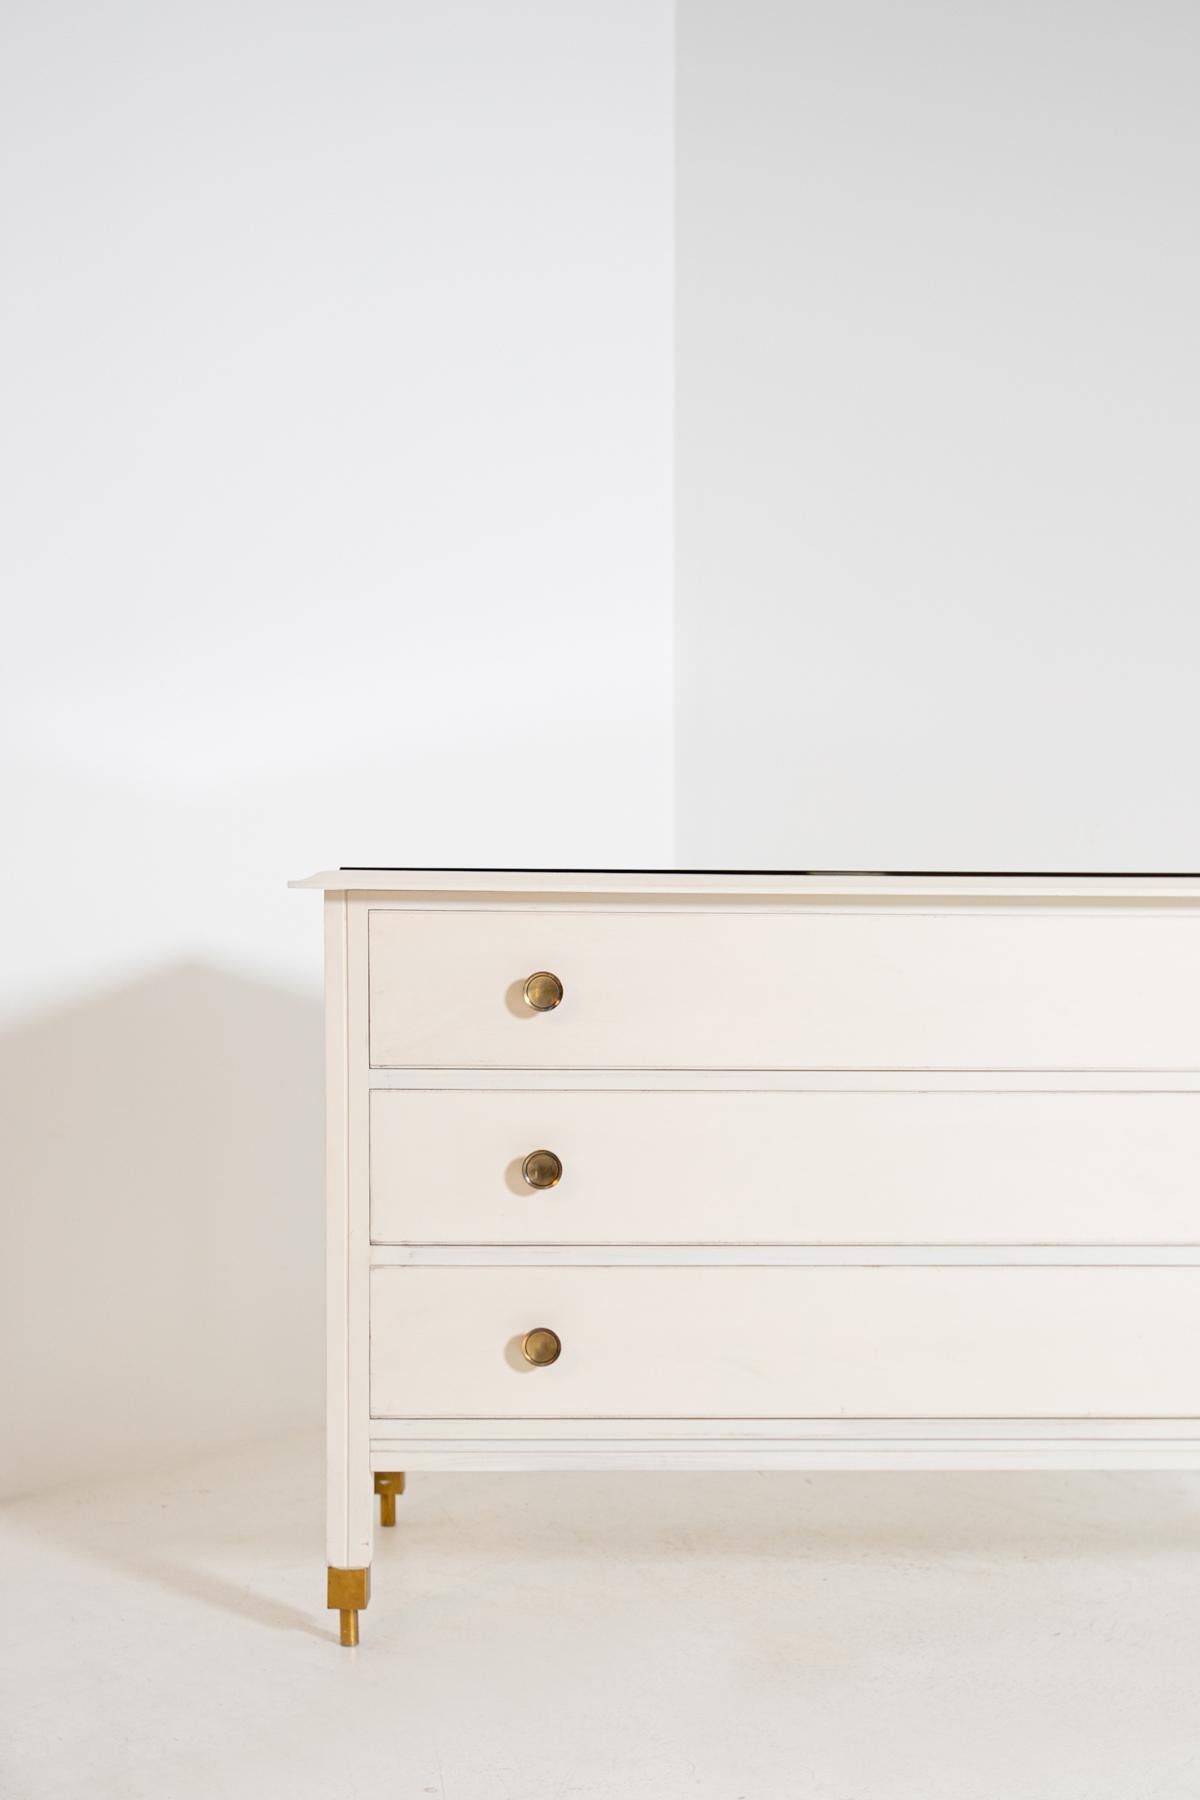 Elegant chest of drawers designed by Carlo de Carli for the Italian manufacturer Sormani in 1964, model D154. The chest of drawers is made of white lacquered wood with brass details and round knobs. Note the feet of the cabinet: they are made with